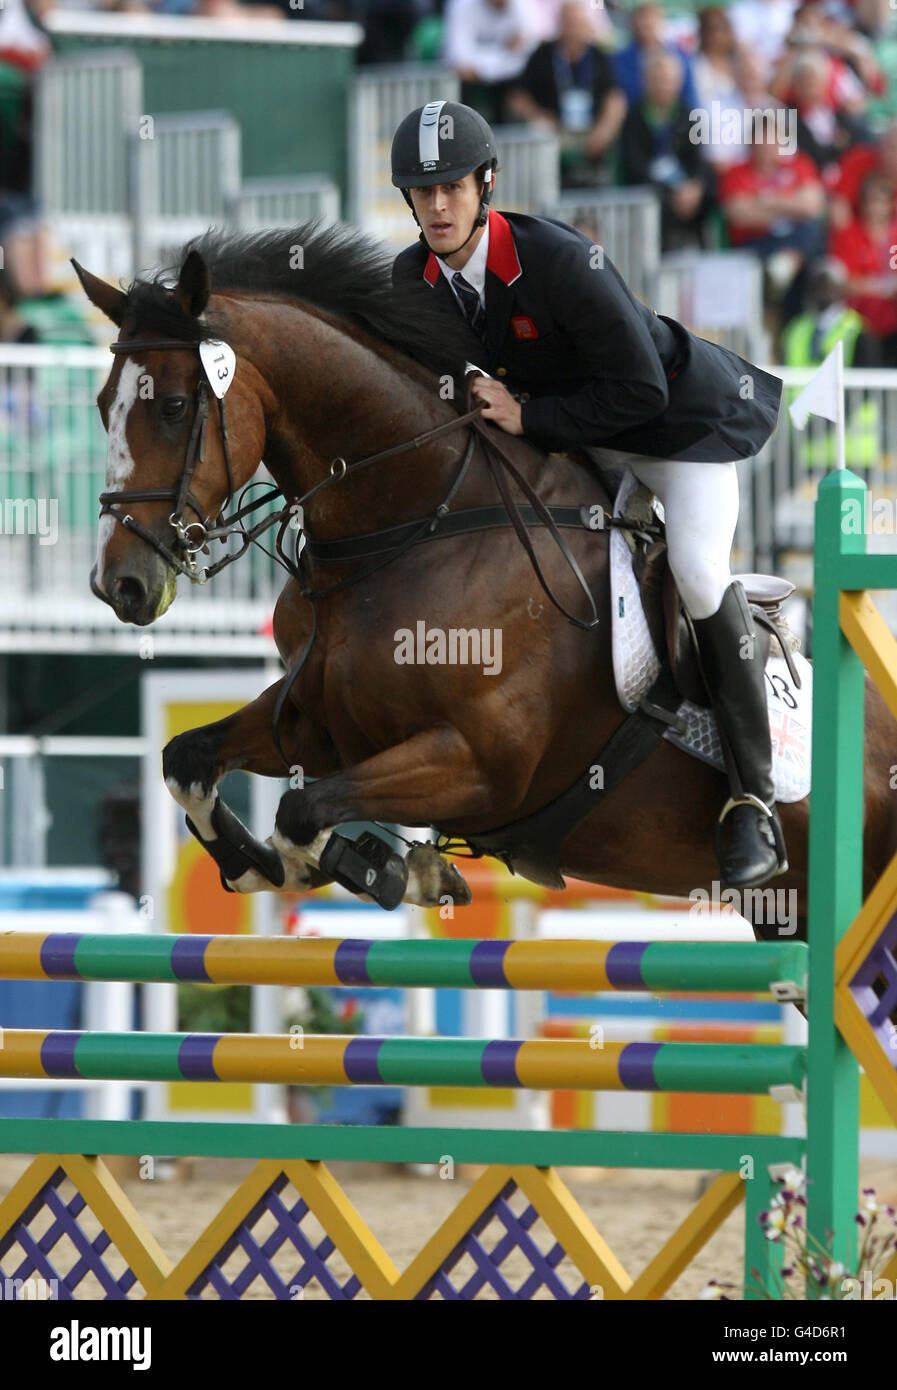 Great Britain's Nicolas Woodbridge riding Liberty XII competes in the Show Jumping section during the Modern Pentathlon World Cup Finals at Crystal Palace, London. Stock Photo